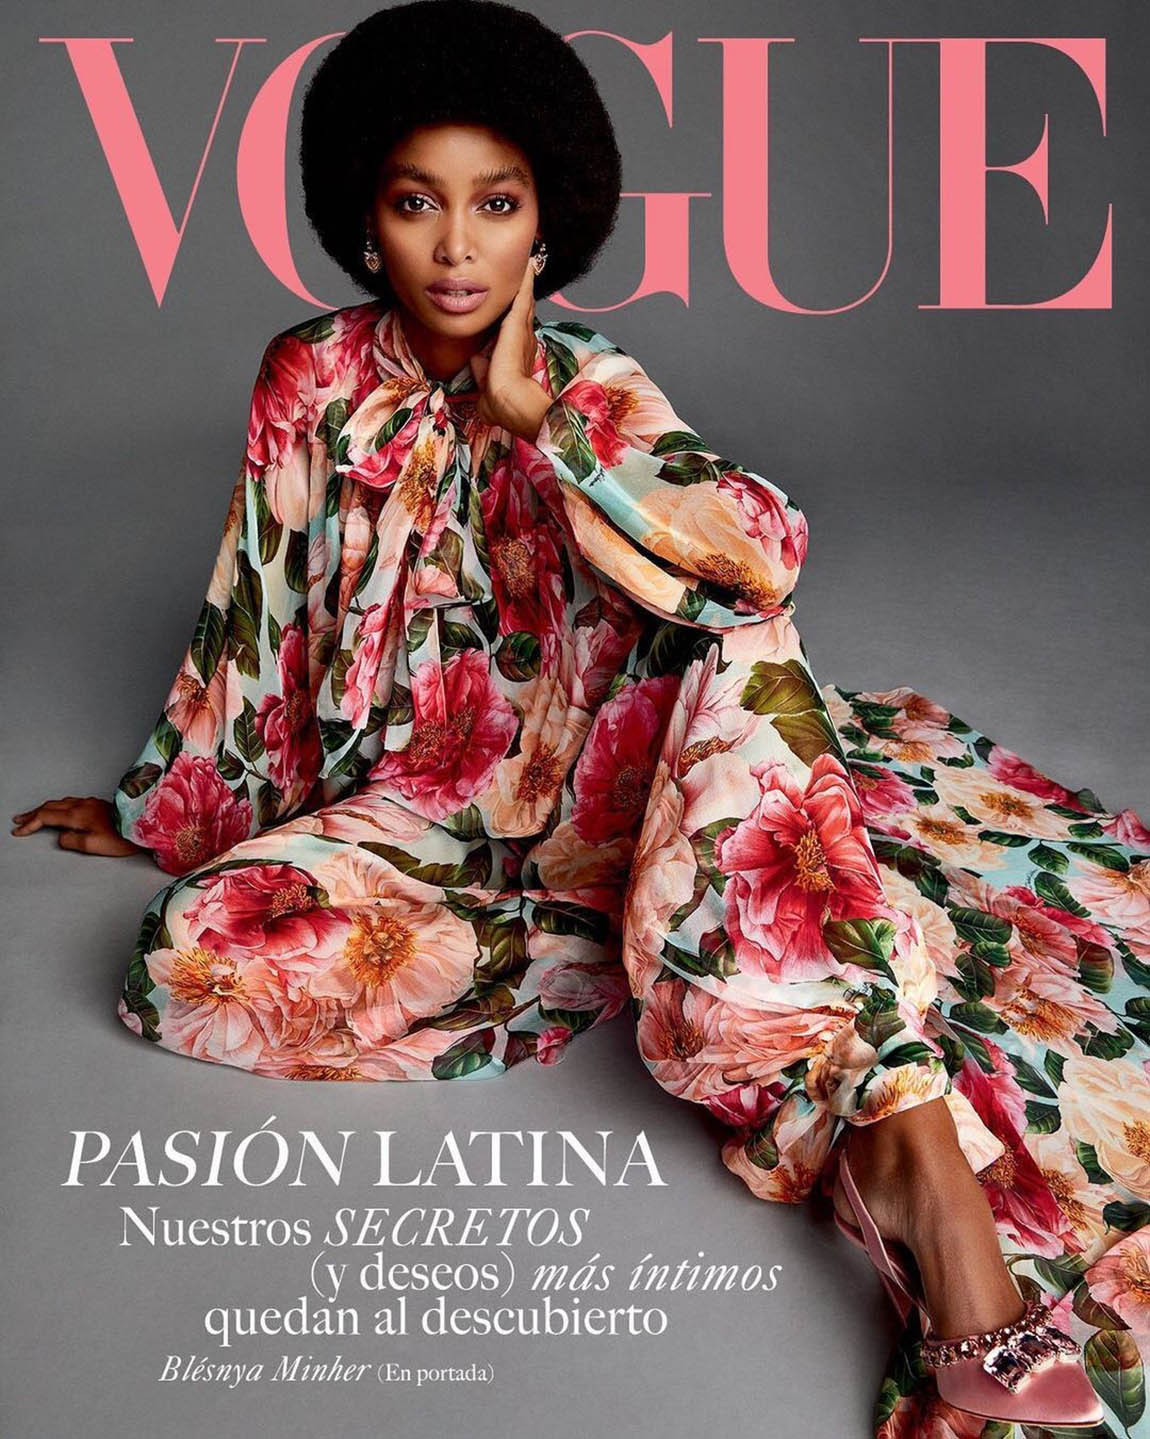 Blesnya Minher covers Vogue Latin America February 2021 by Miguel Reveriego